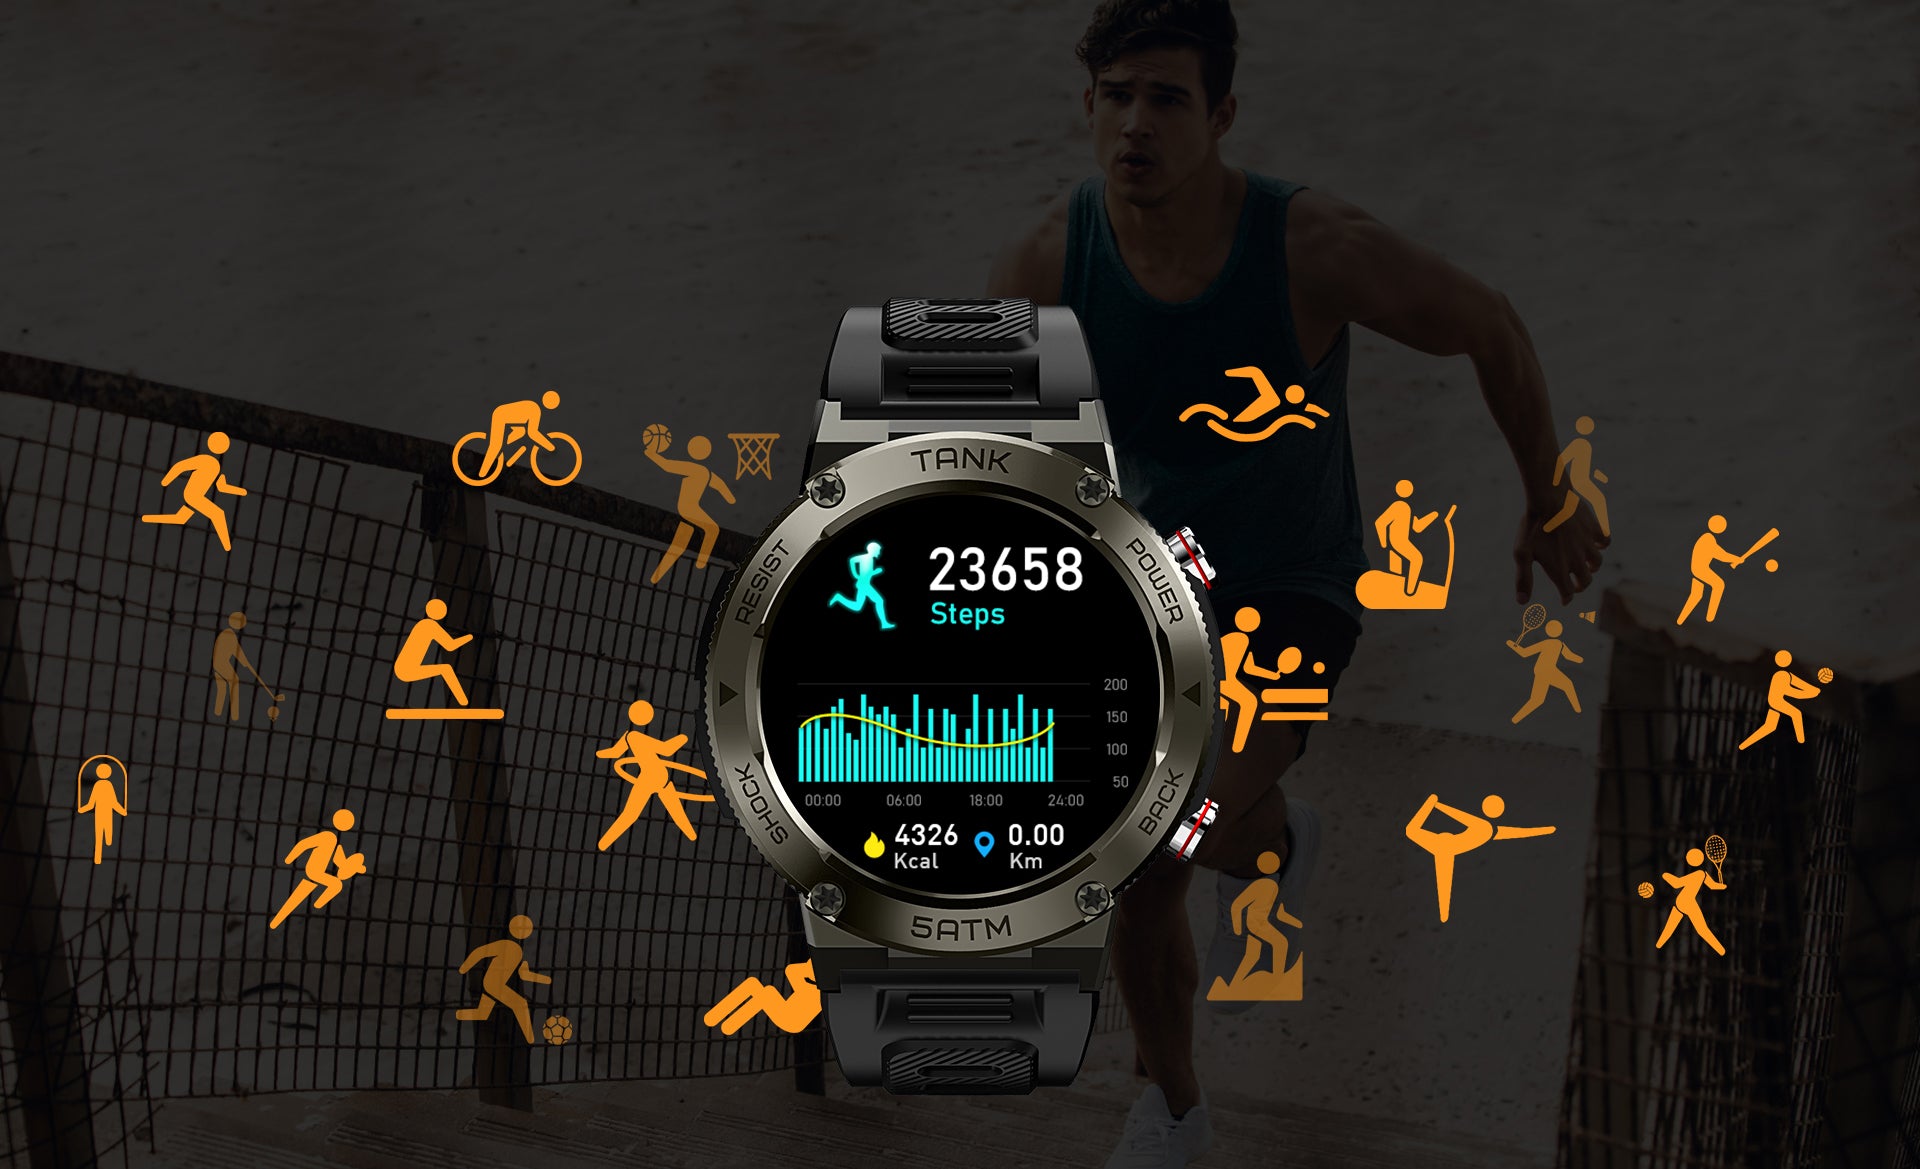 KOSPET TANK T1 Smartwatch Unlimited Access to 20 Sports Modes